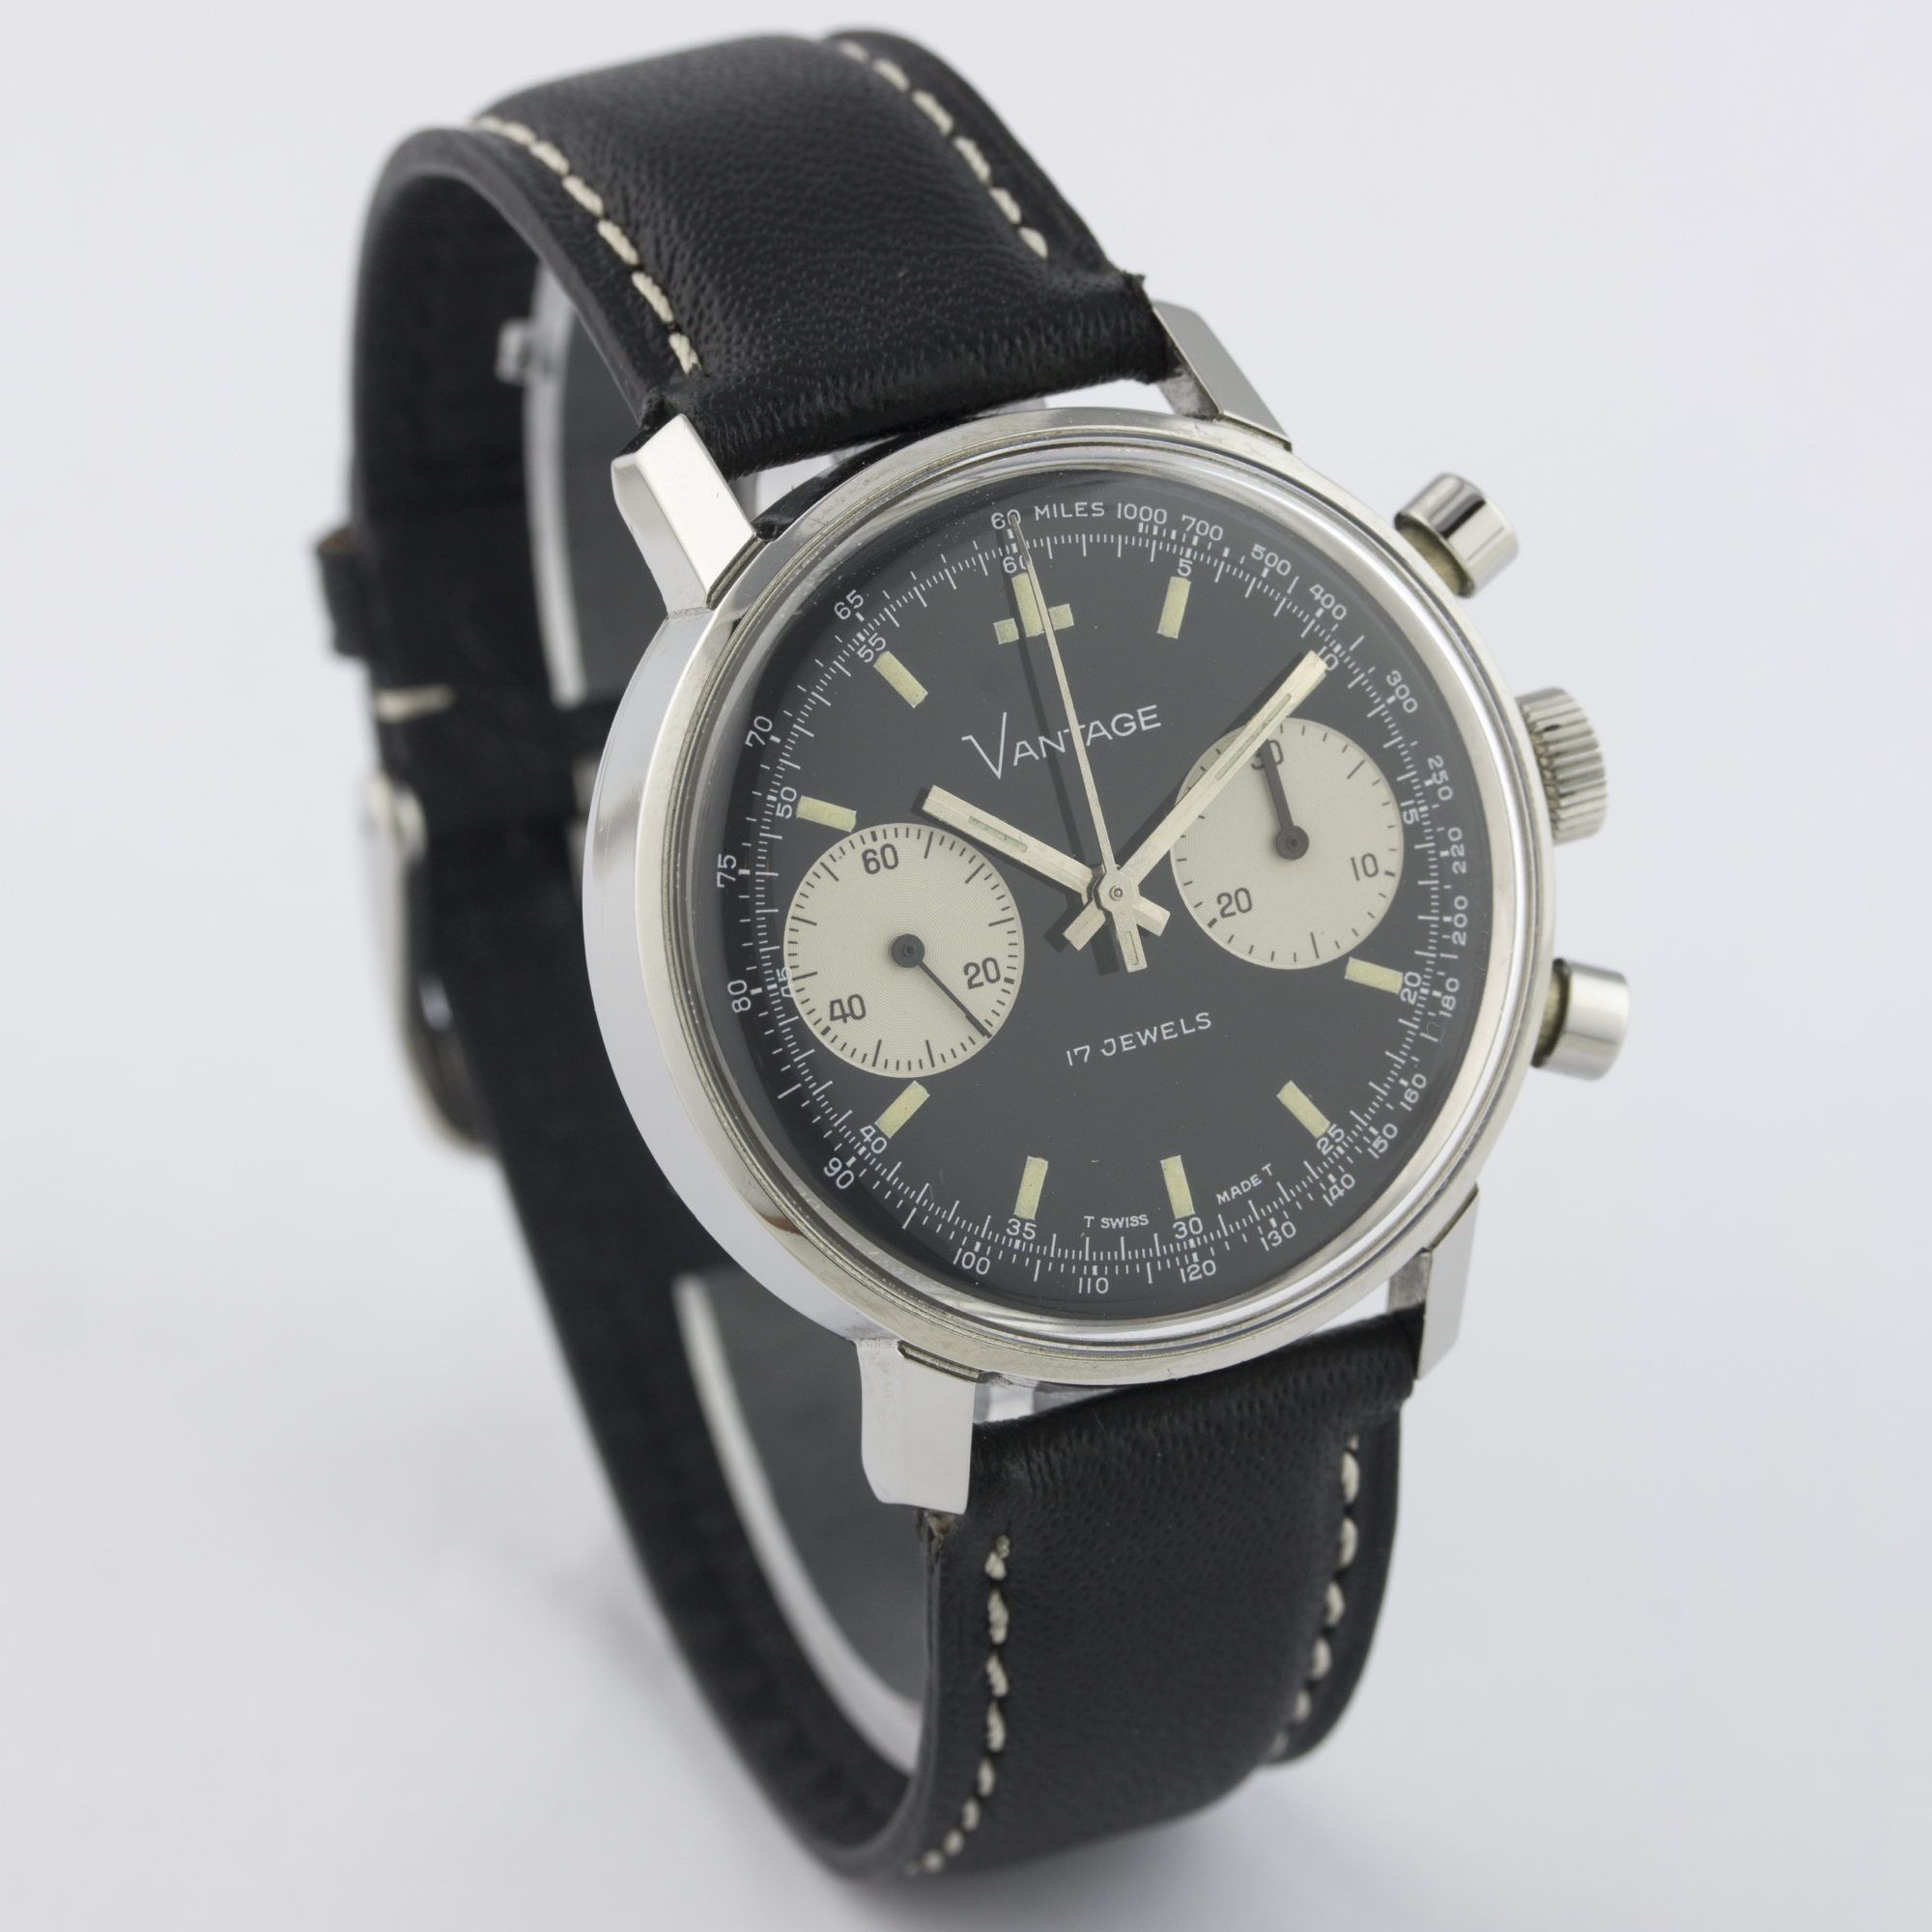 A GENTLEMAN’S STAINLESS STEEL VANTAGE CHRONOGRAPH WRIST WATCH CIRCA 1970 D: Black dial with luminous - Image 4 of 7